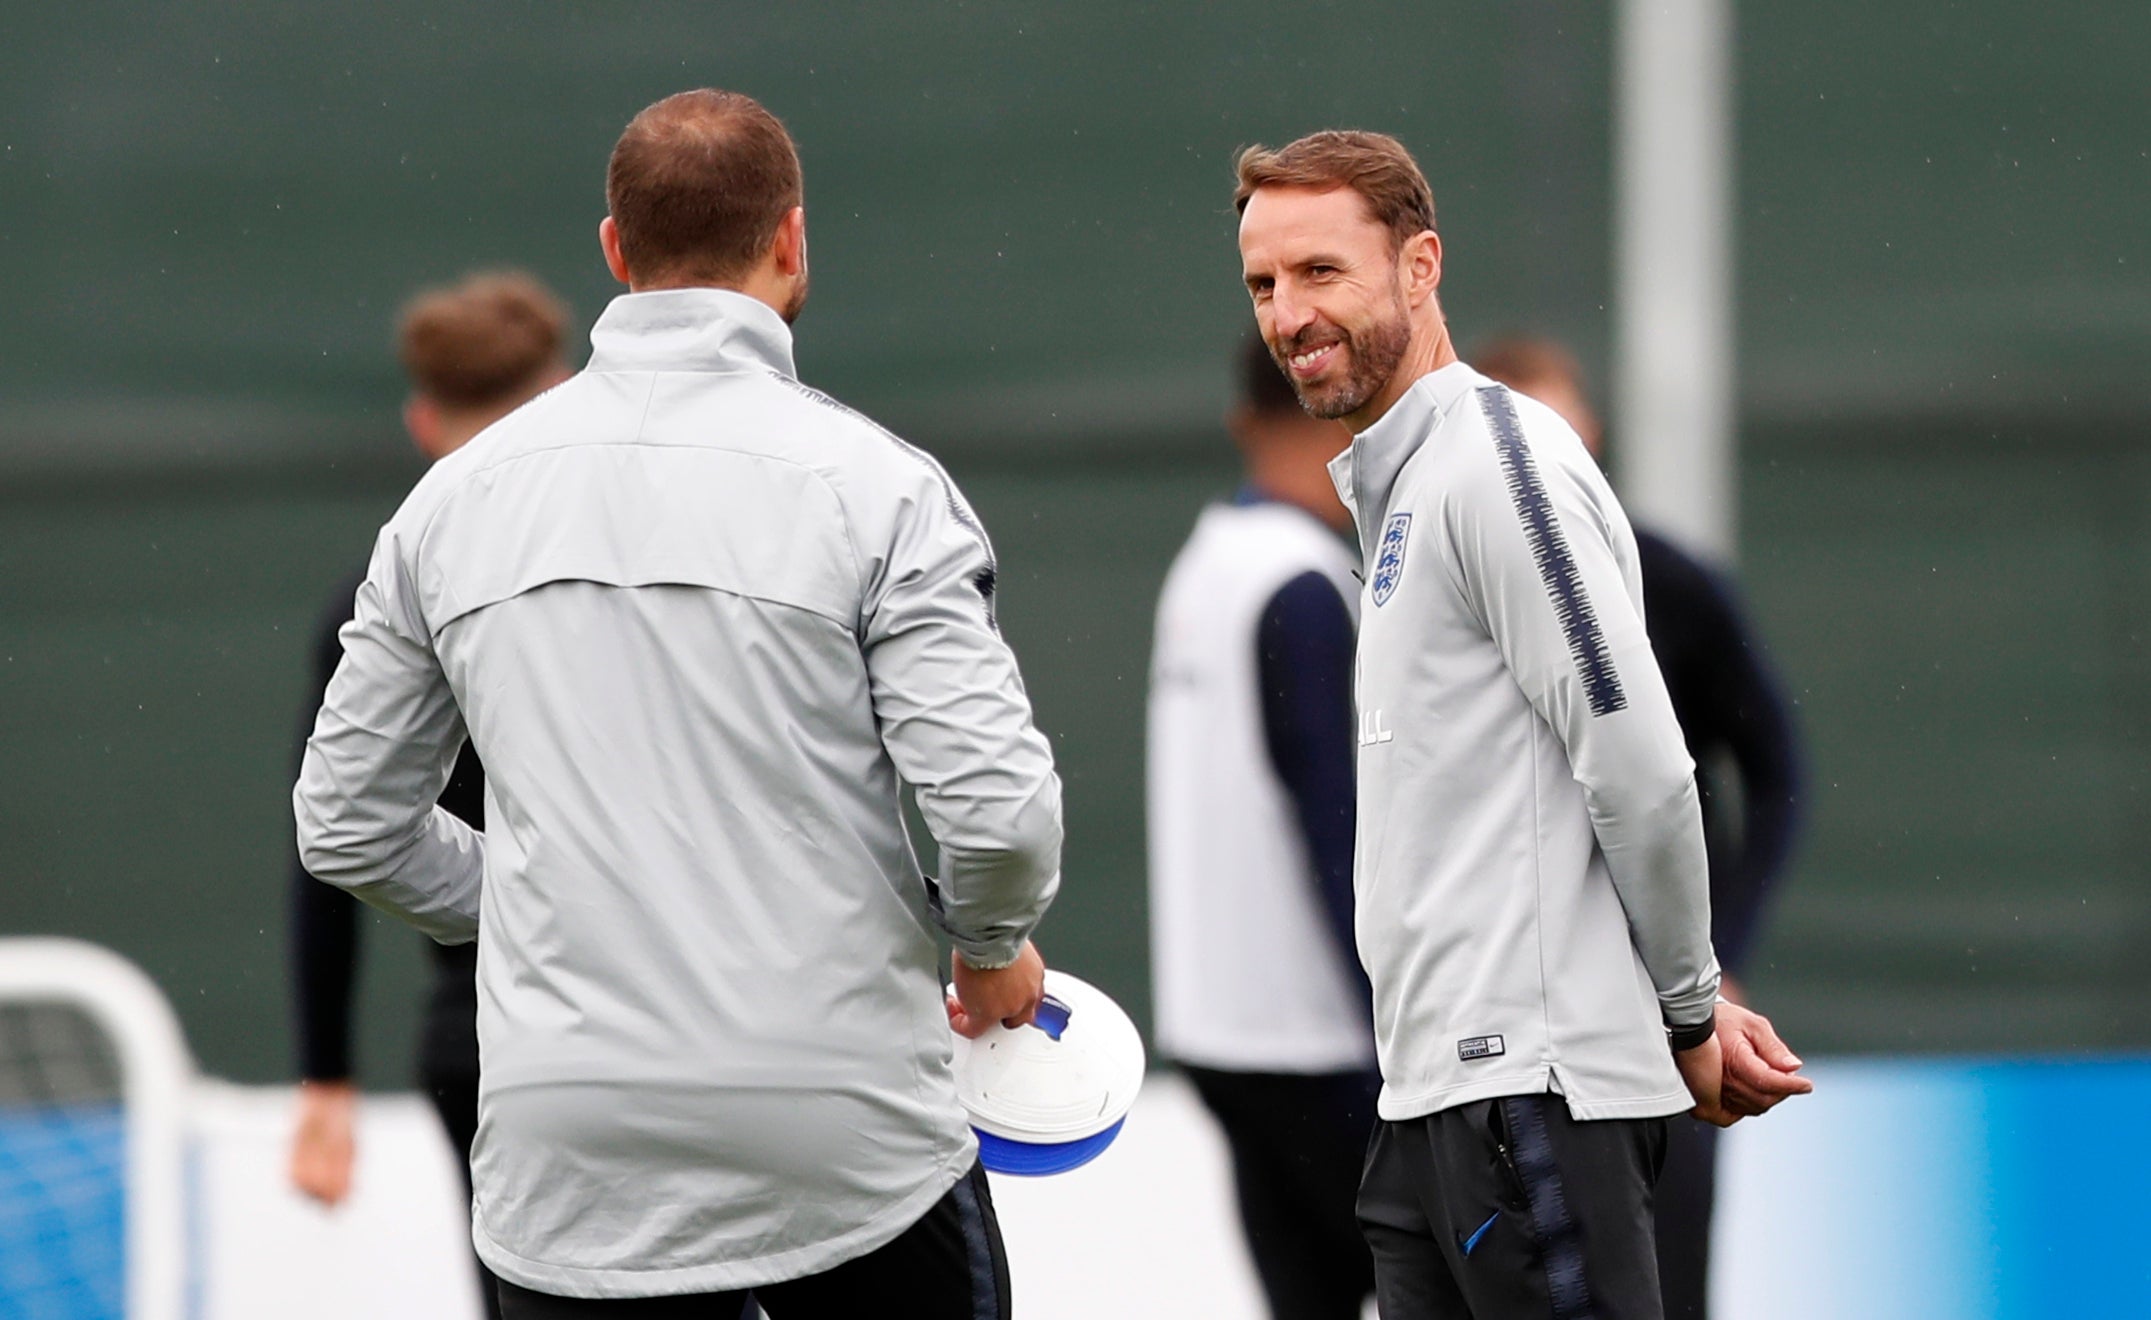 Southgate has his team on the verge of something special